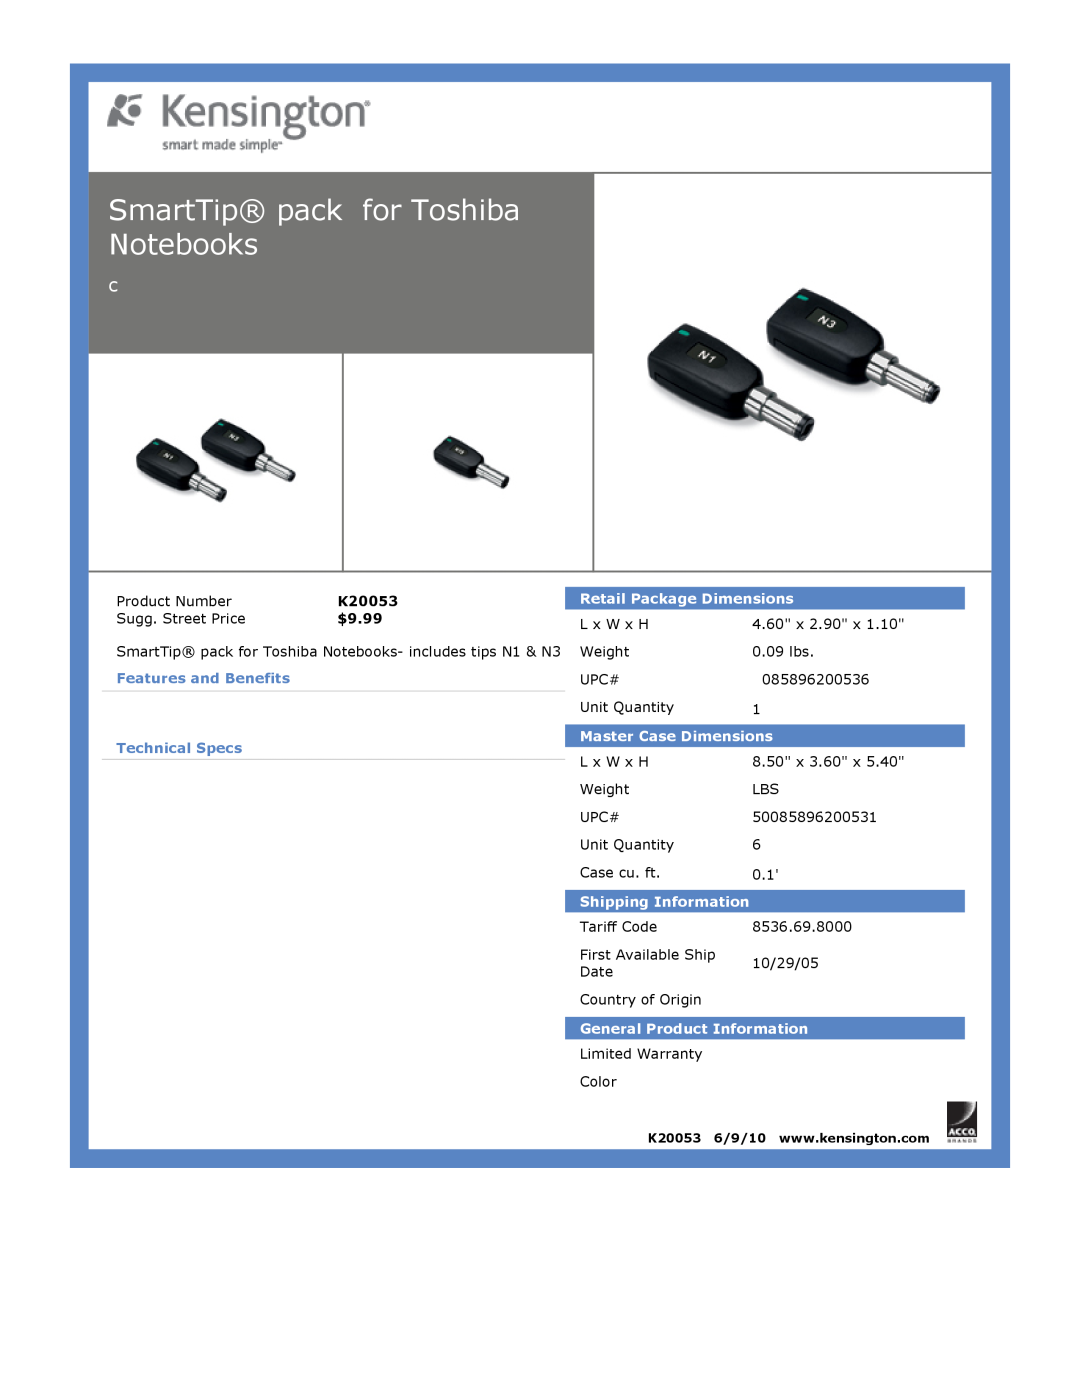 Kensington EU64325 dimensions SmartTip pack for Toshiba Notebooks, $9.99, Features and Benefits Technical Specs 